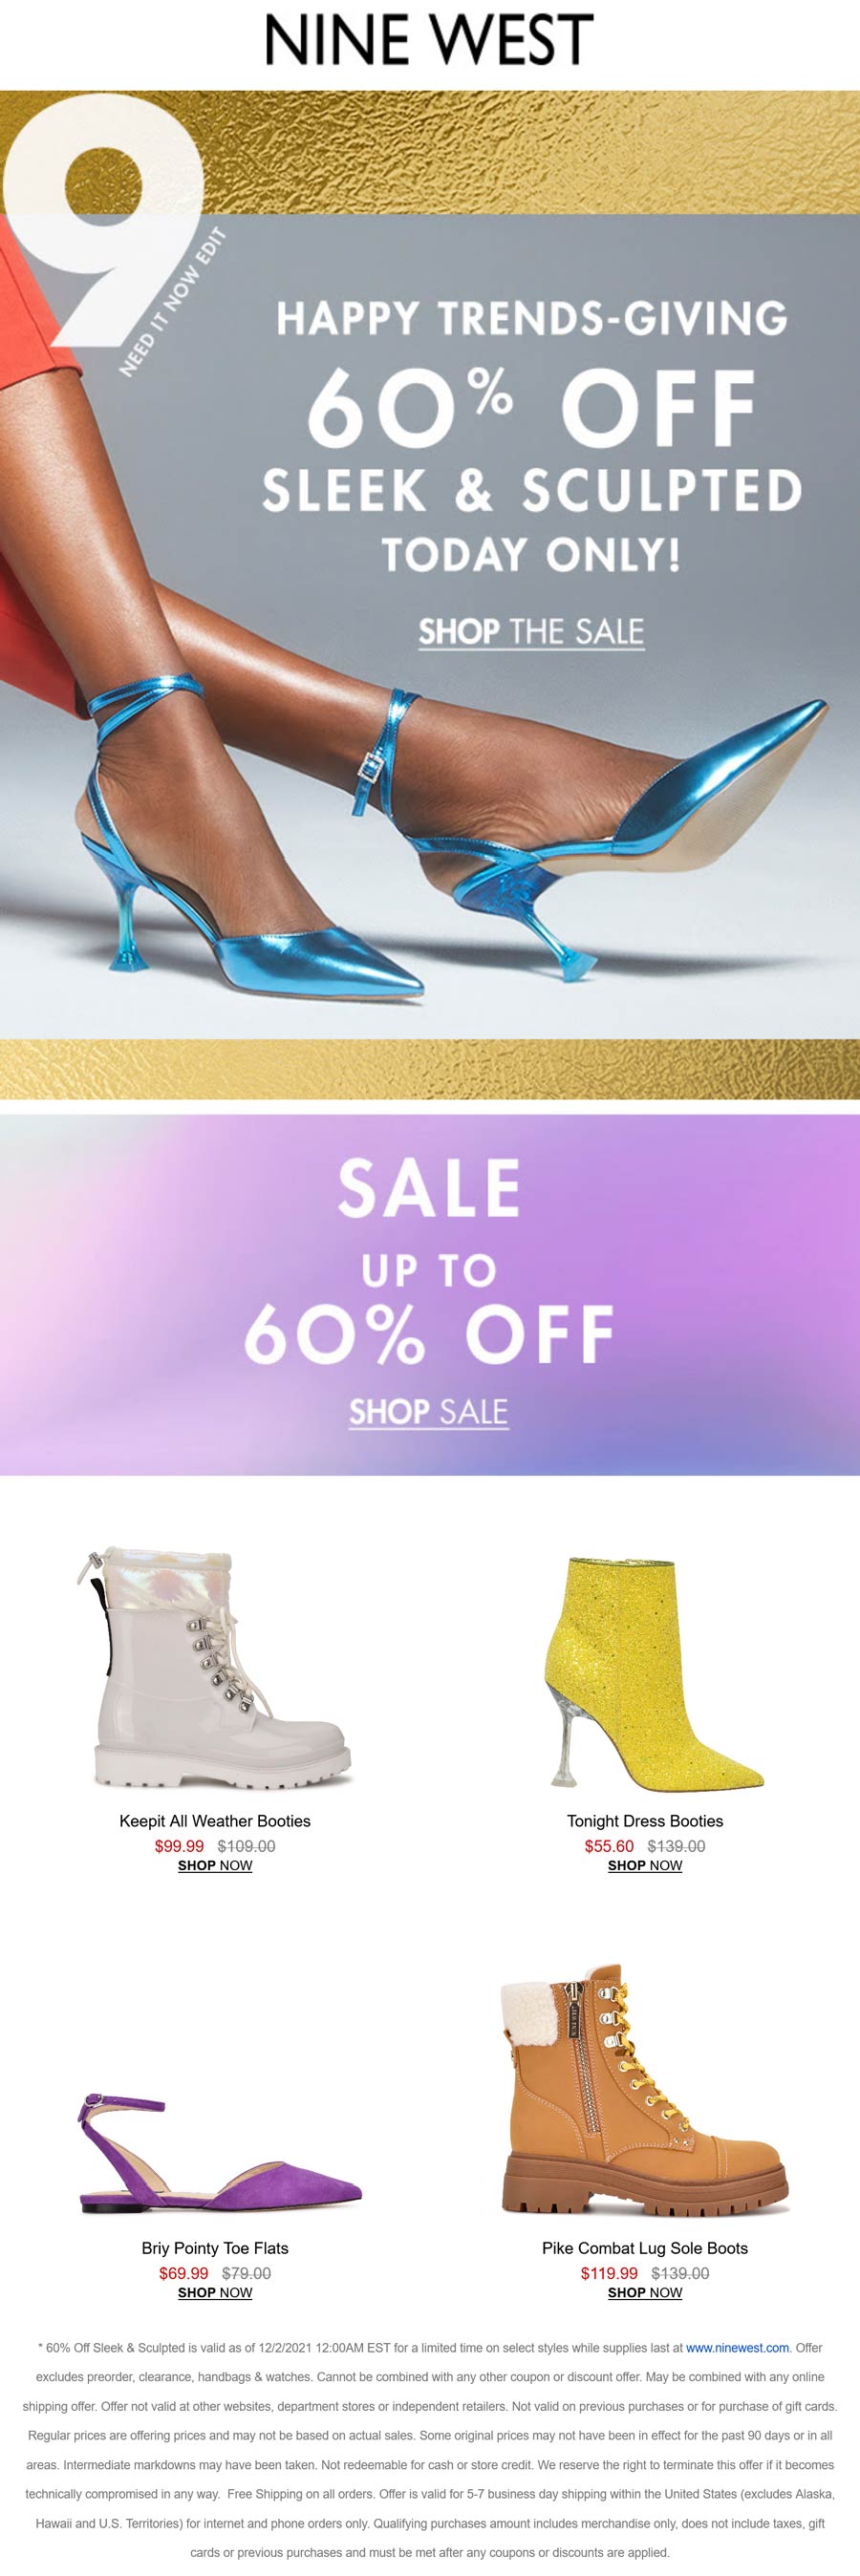 Nine West stores Coupon  60% off heels today at Nine West shoes #ninewest 